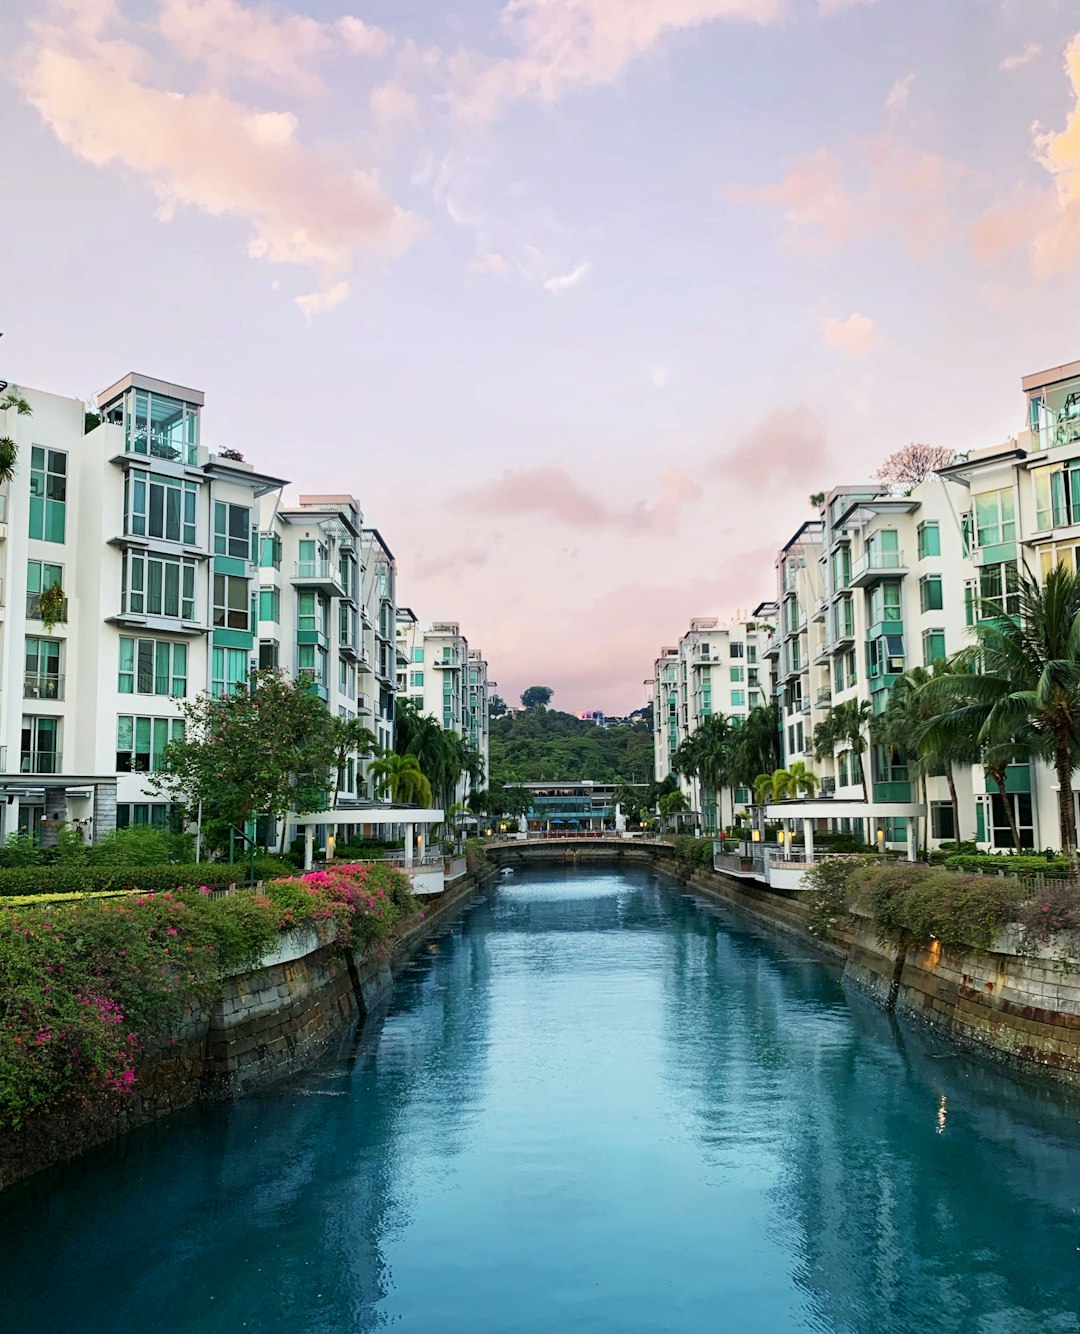 Travel Tips and Stories of Reflections At Keppel Bay in Singapore